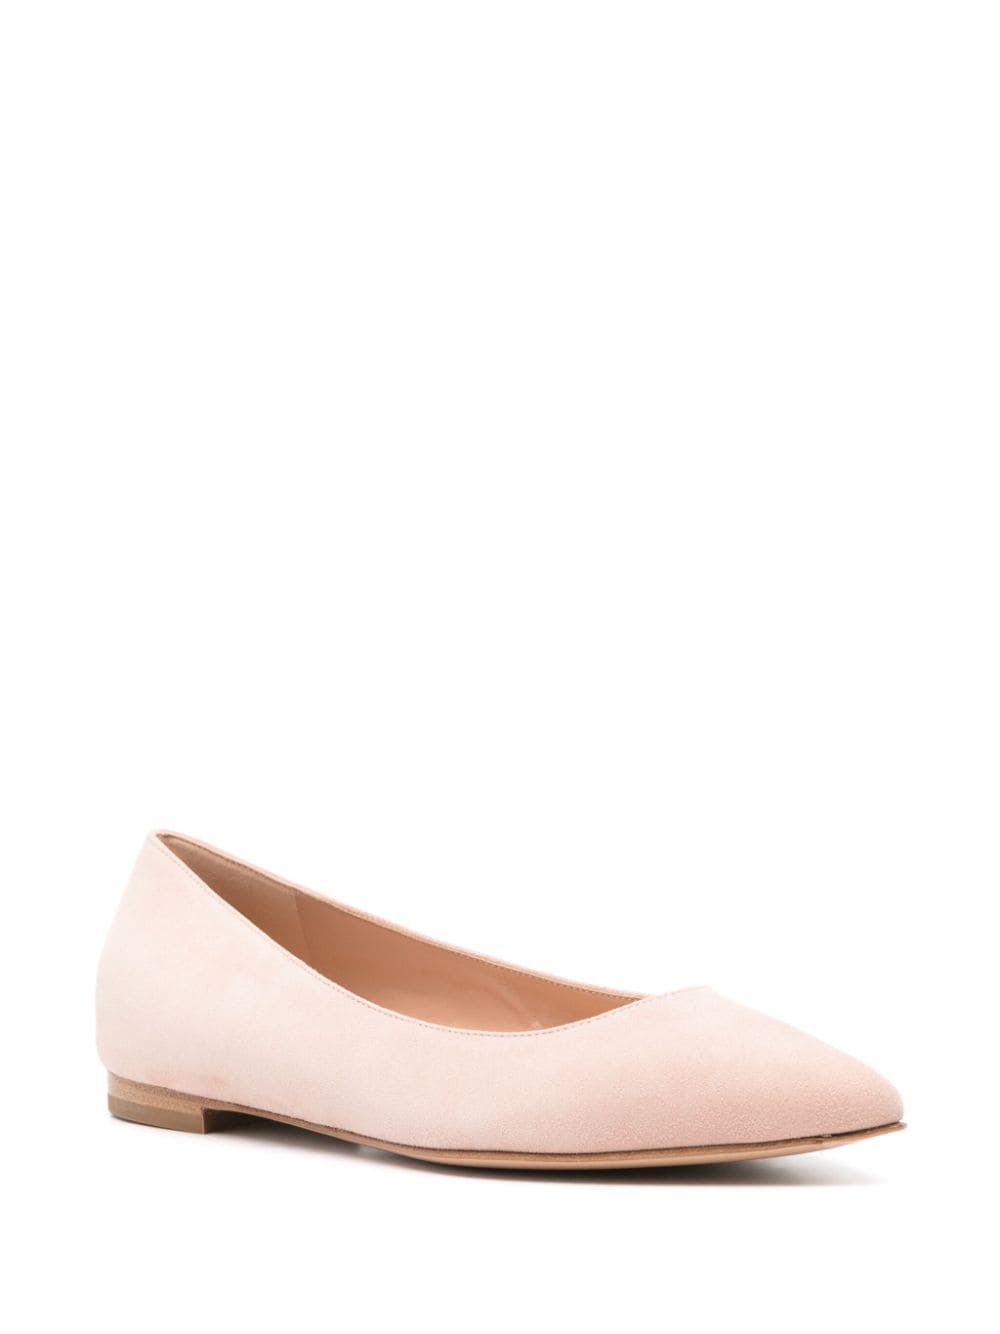 Gianvito Rossi suede pointed-toe ballerina shoes - Roze